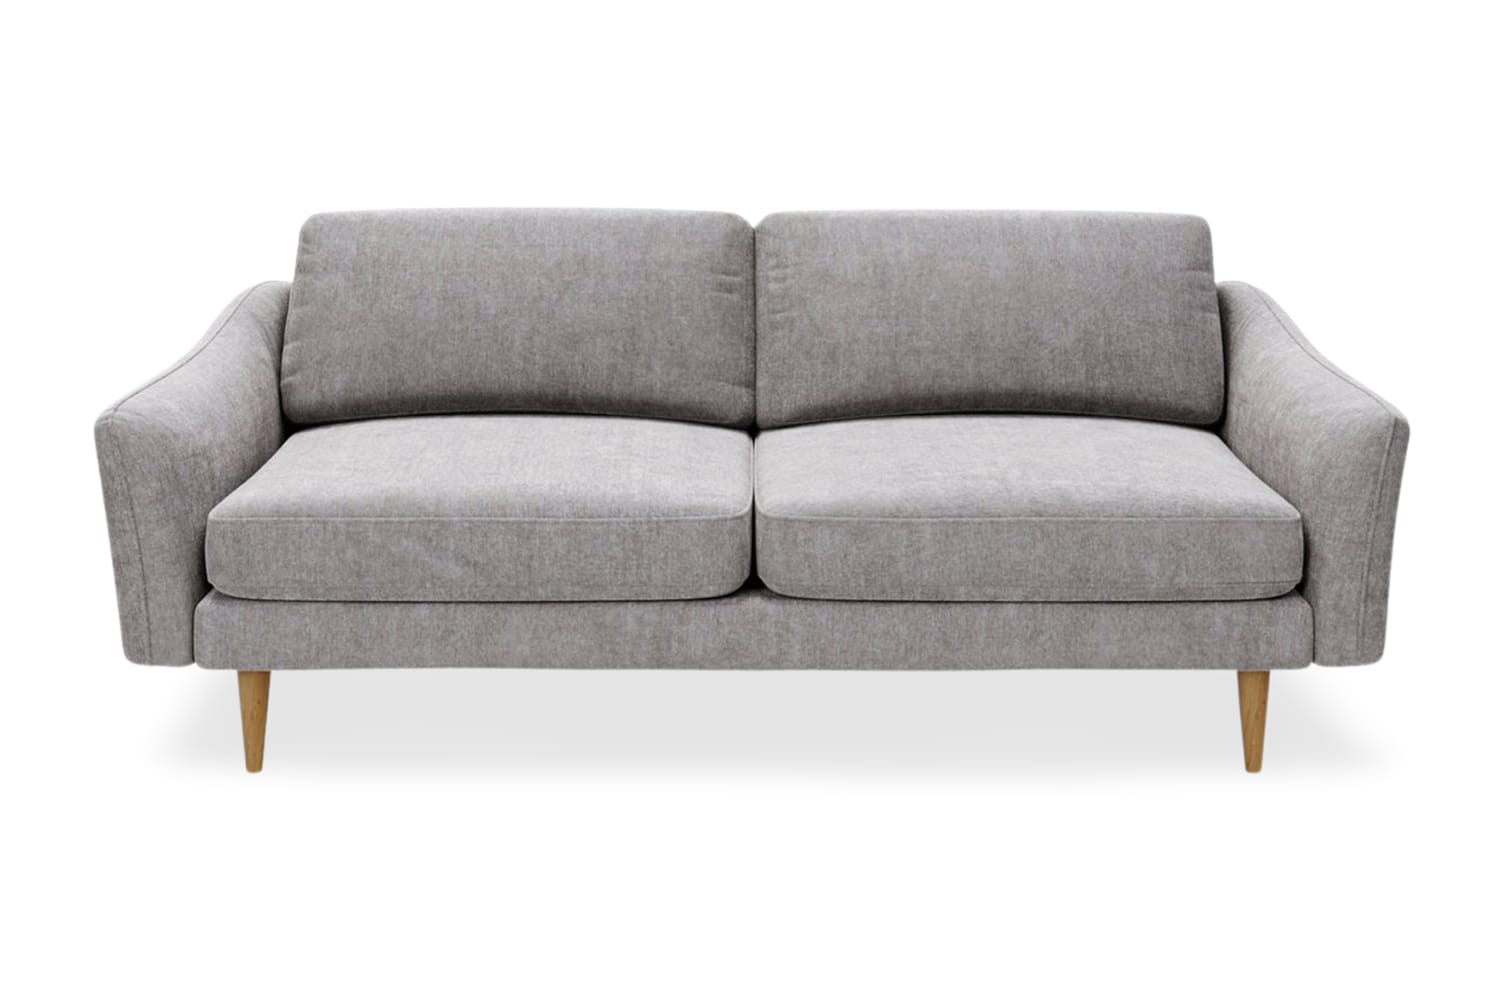 SNUG | The Rebel 3 Seater Sofa in Mid Grey variant_40414890262576